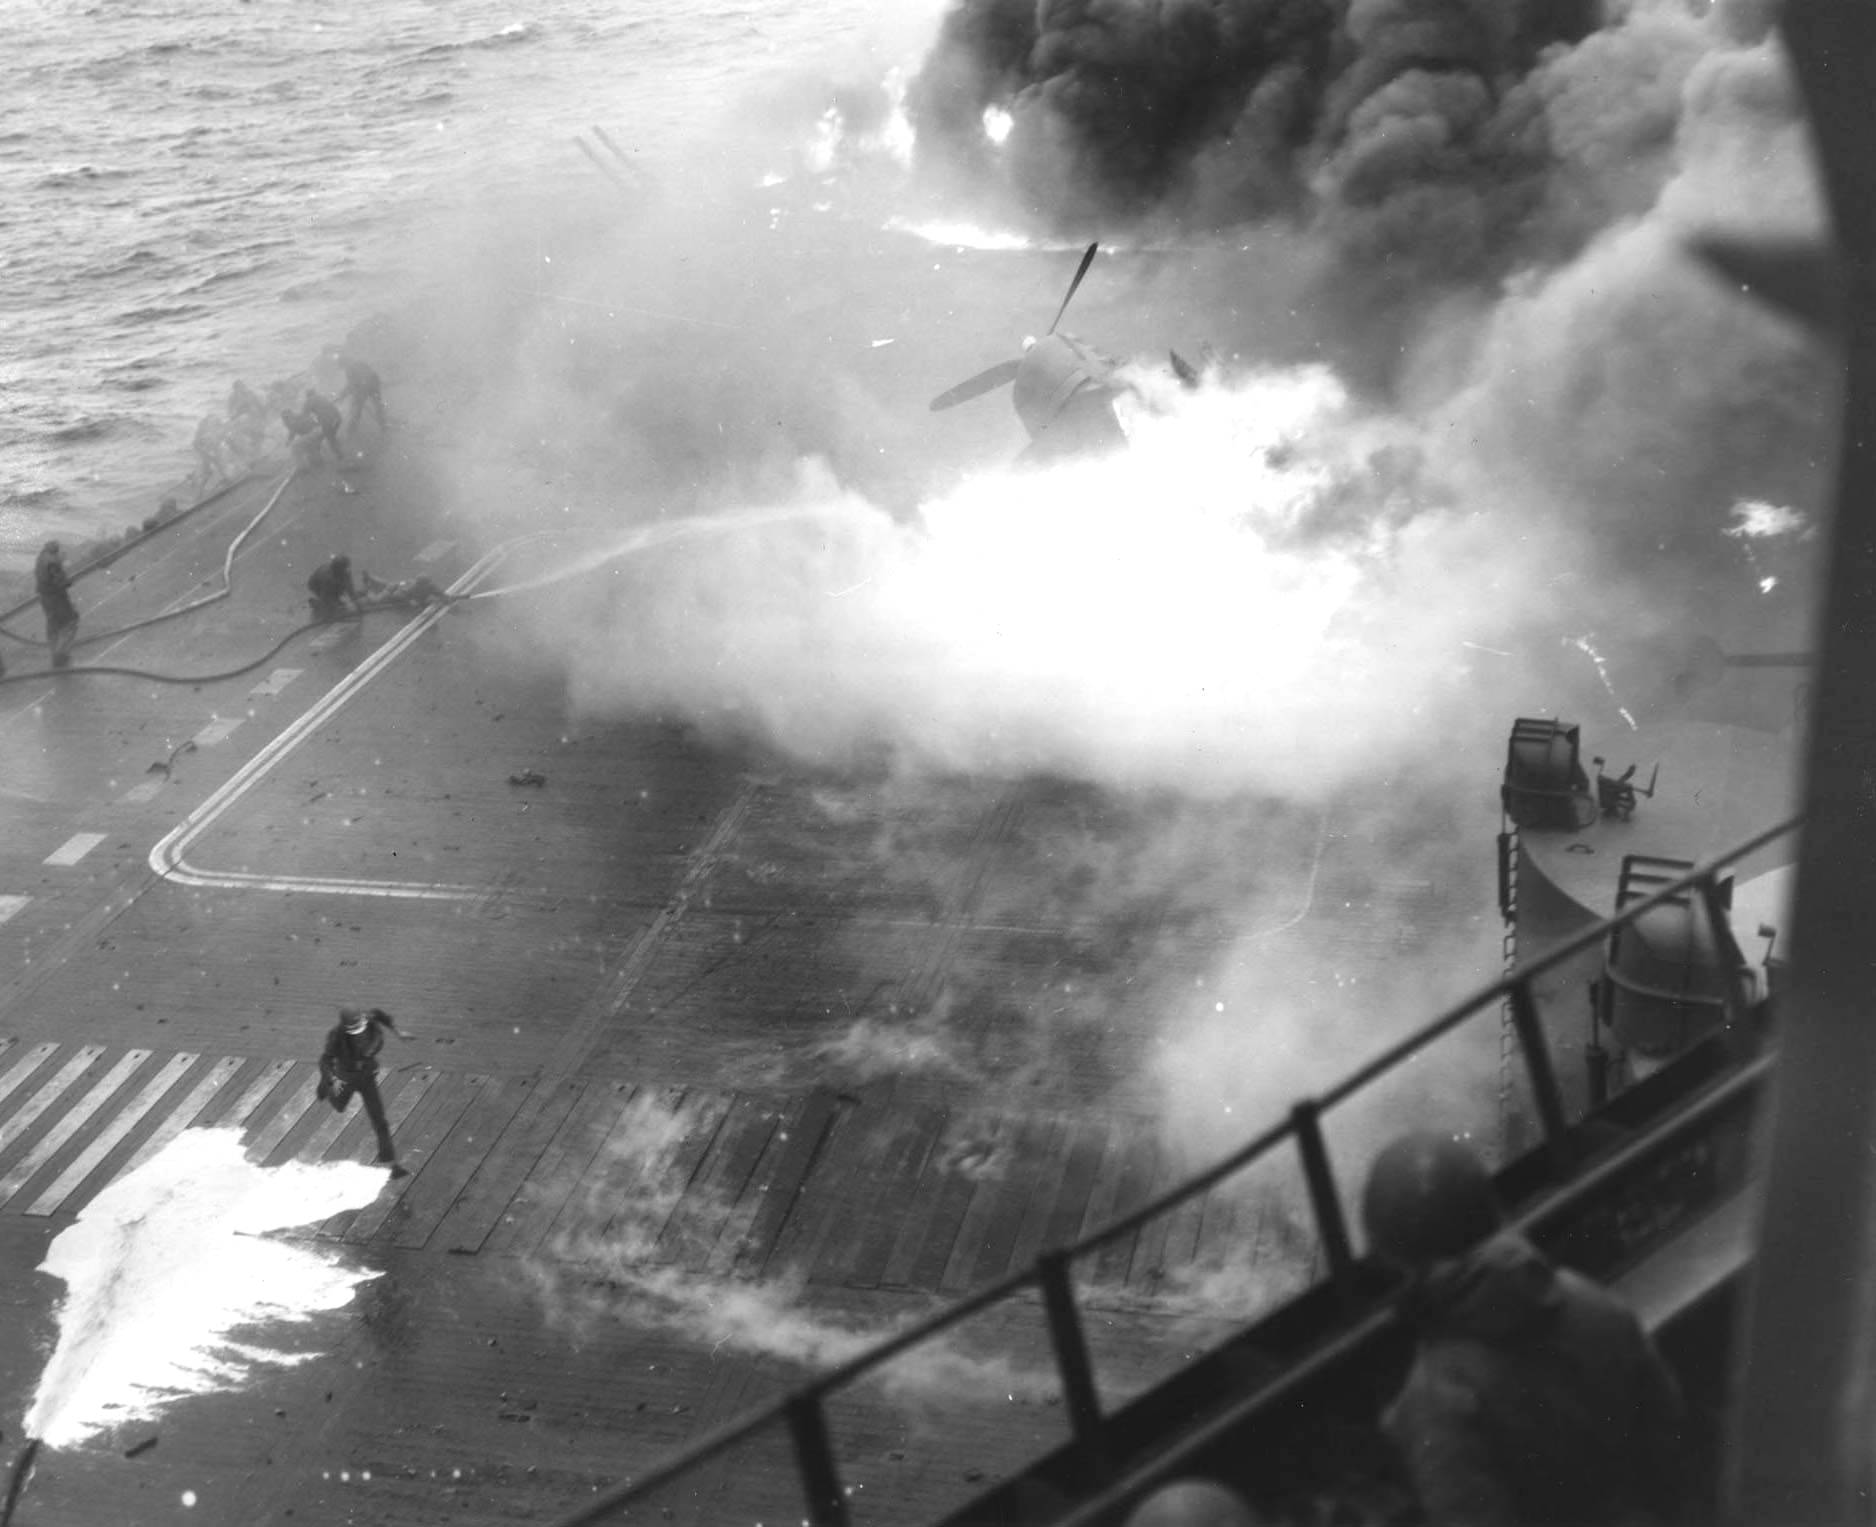 Following an attack from Japanese special attack aircraft, fires grew in the forward hangar deck of USS Saratoga off Iwo Jima, 21 Feb 1945. The fires increased greatly before they could be controlled. Photo 3 of 3